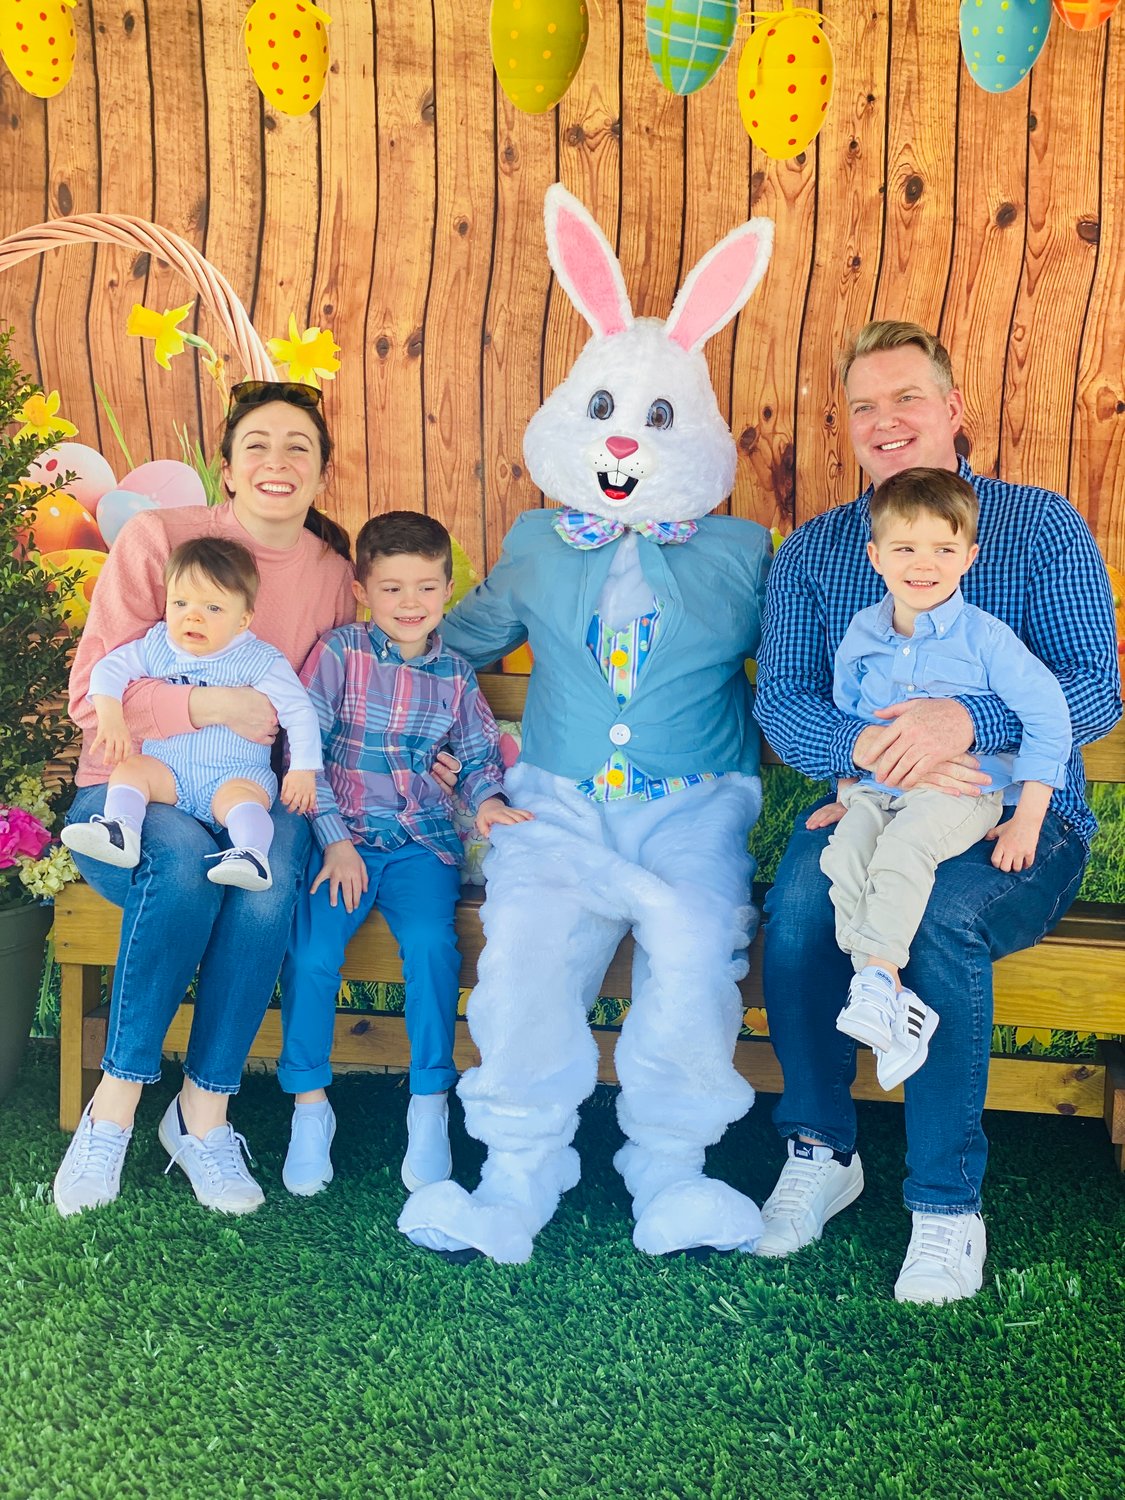 The McGinnis family met the guest of honor, the Easter Bunny at Rolling River.